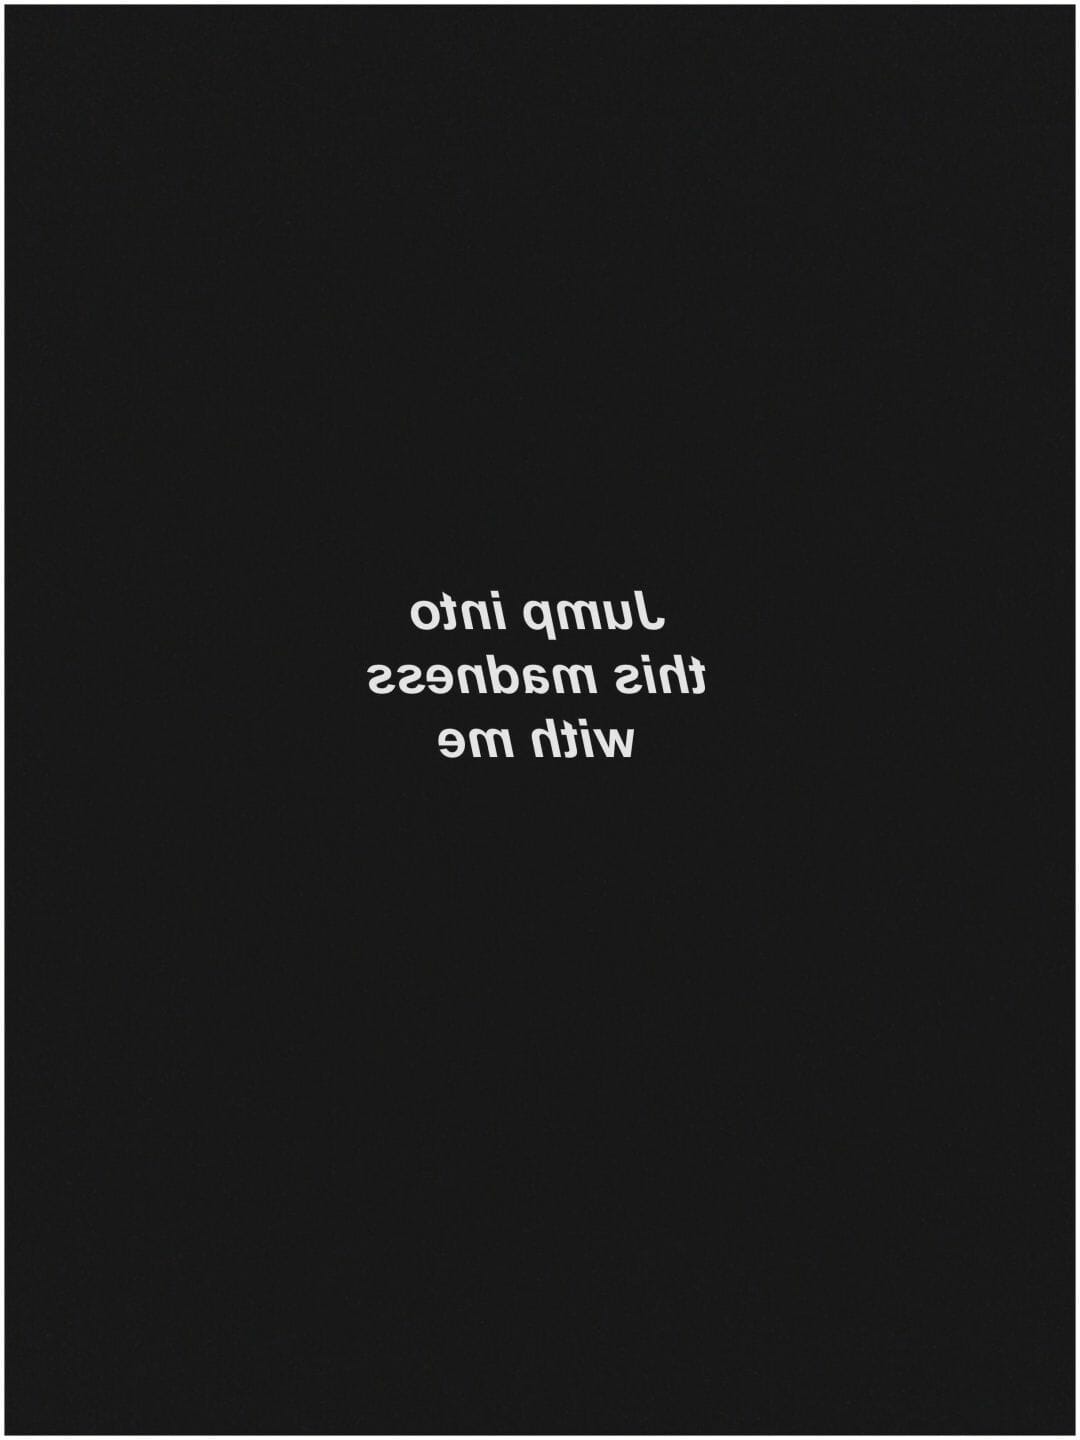 Aesthetic Black Quotes, iPhone, Desktop HD Background / Wallpaper (1080p, 4k) HD Wallpaper (Desktop Background / Android / iPhone) (1080p, 4k) (1080x1440)